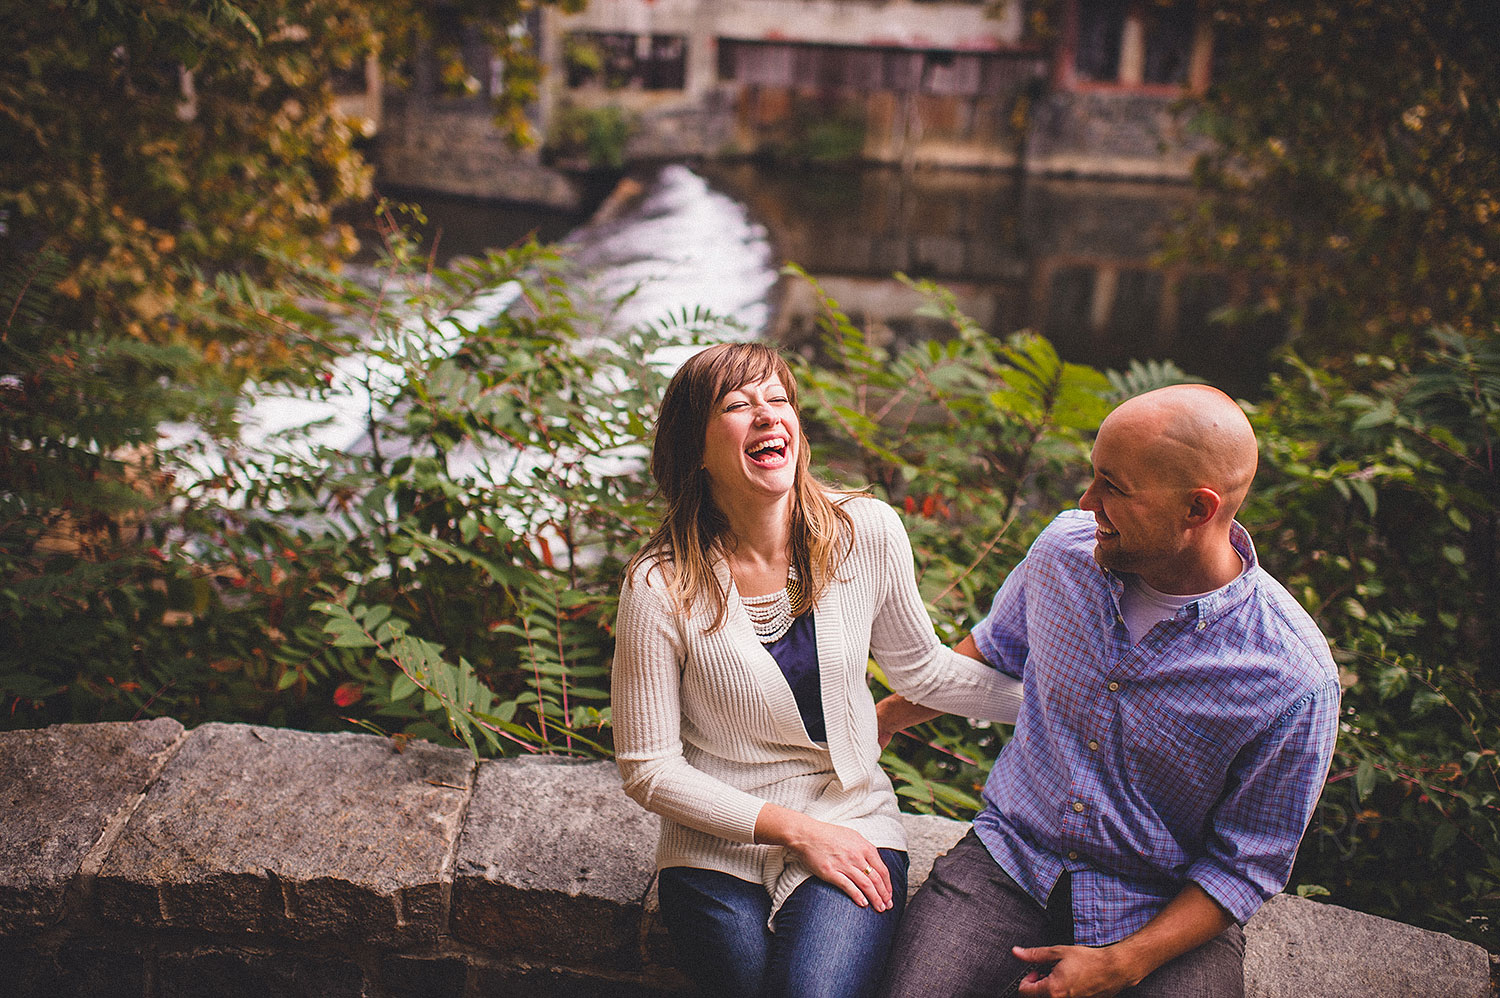 pat-robinson-photography-wilmington-engagement-session-13-2.jpg